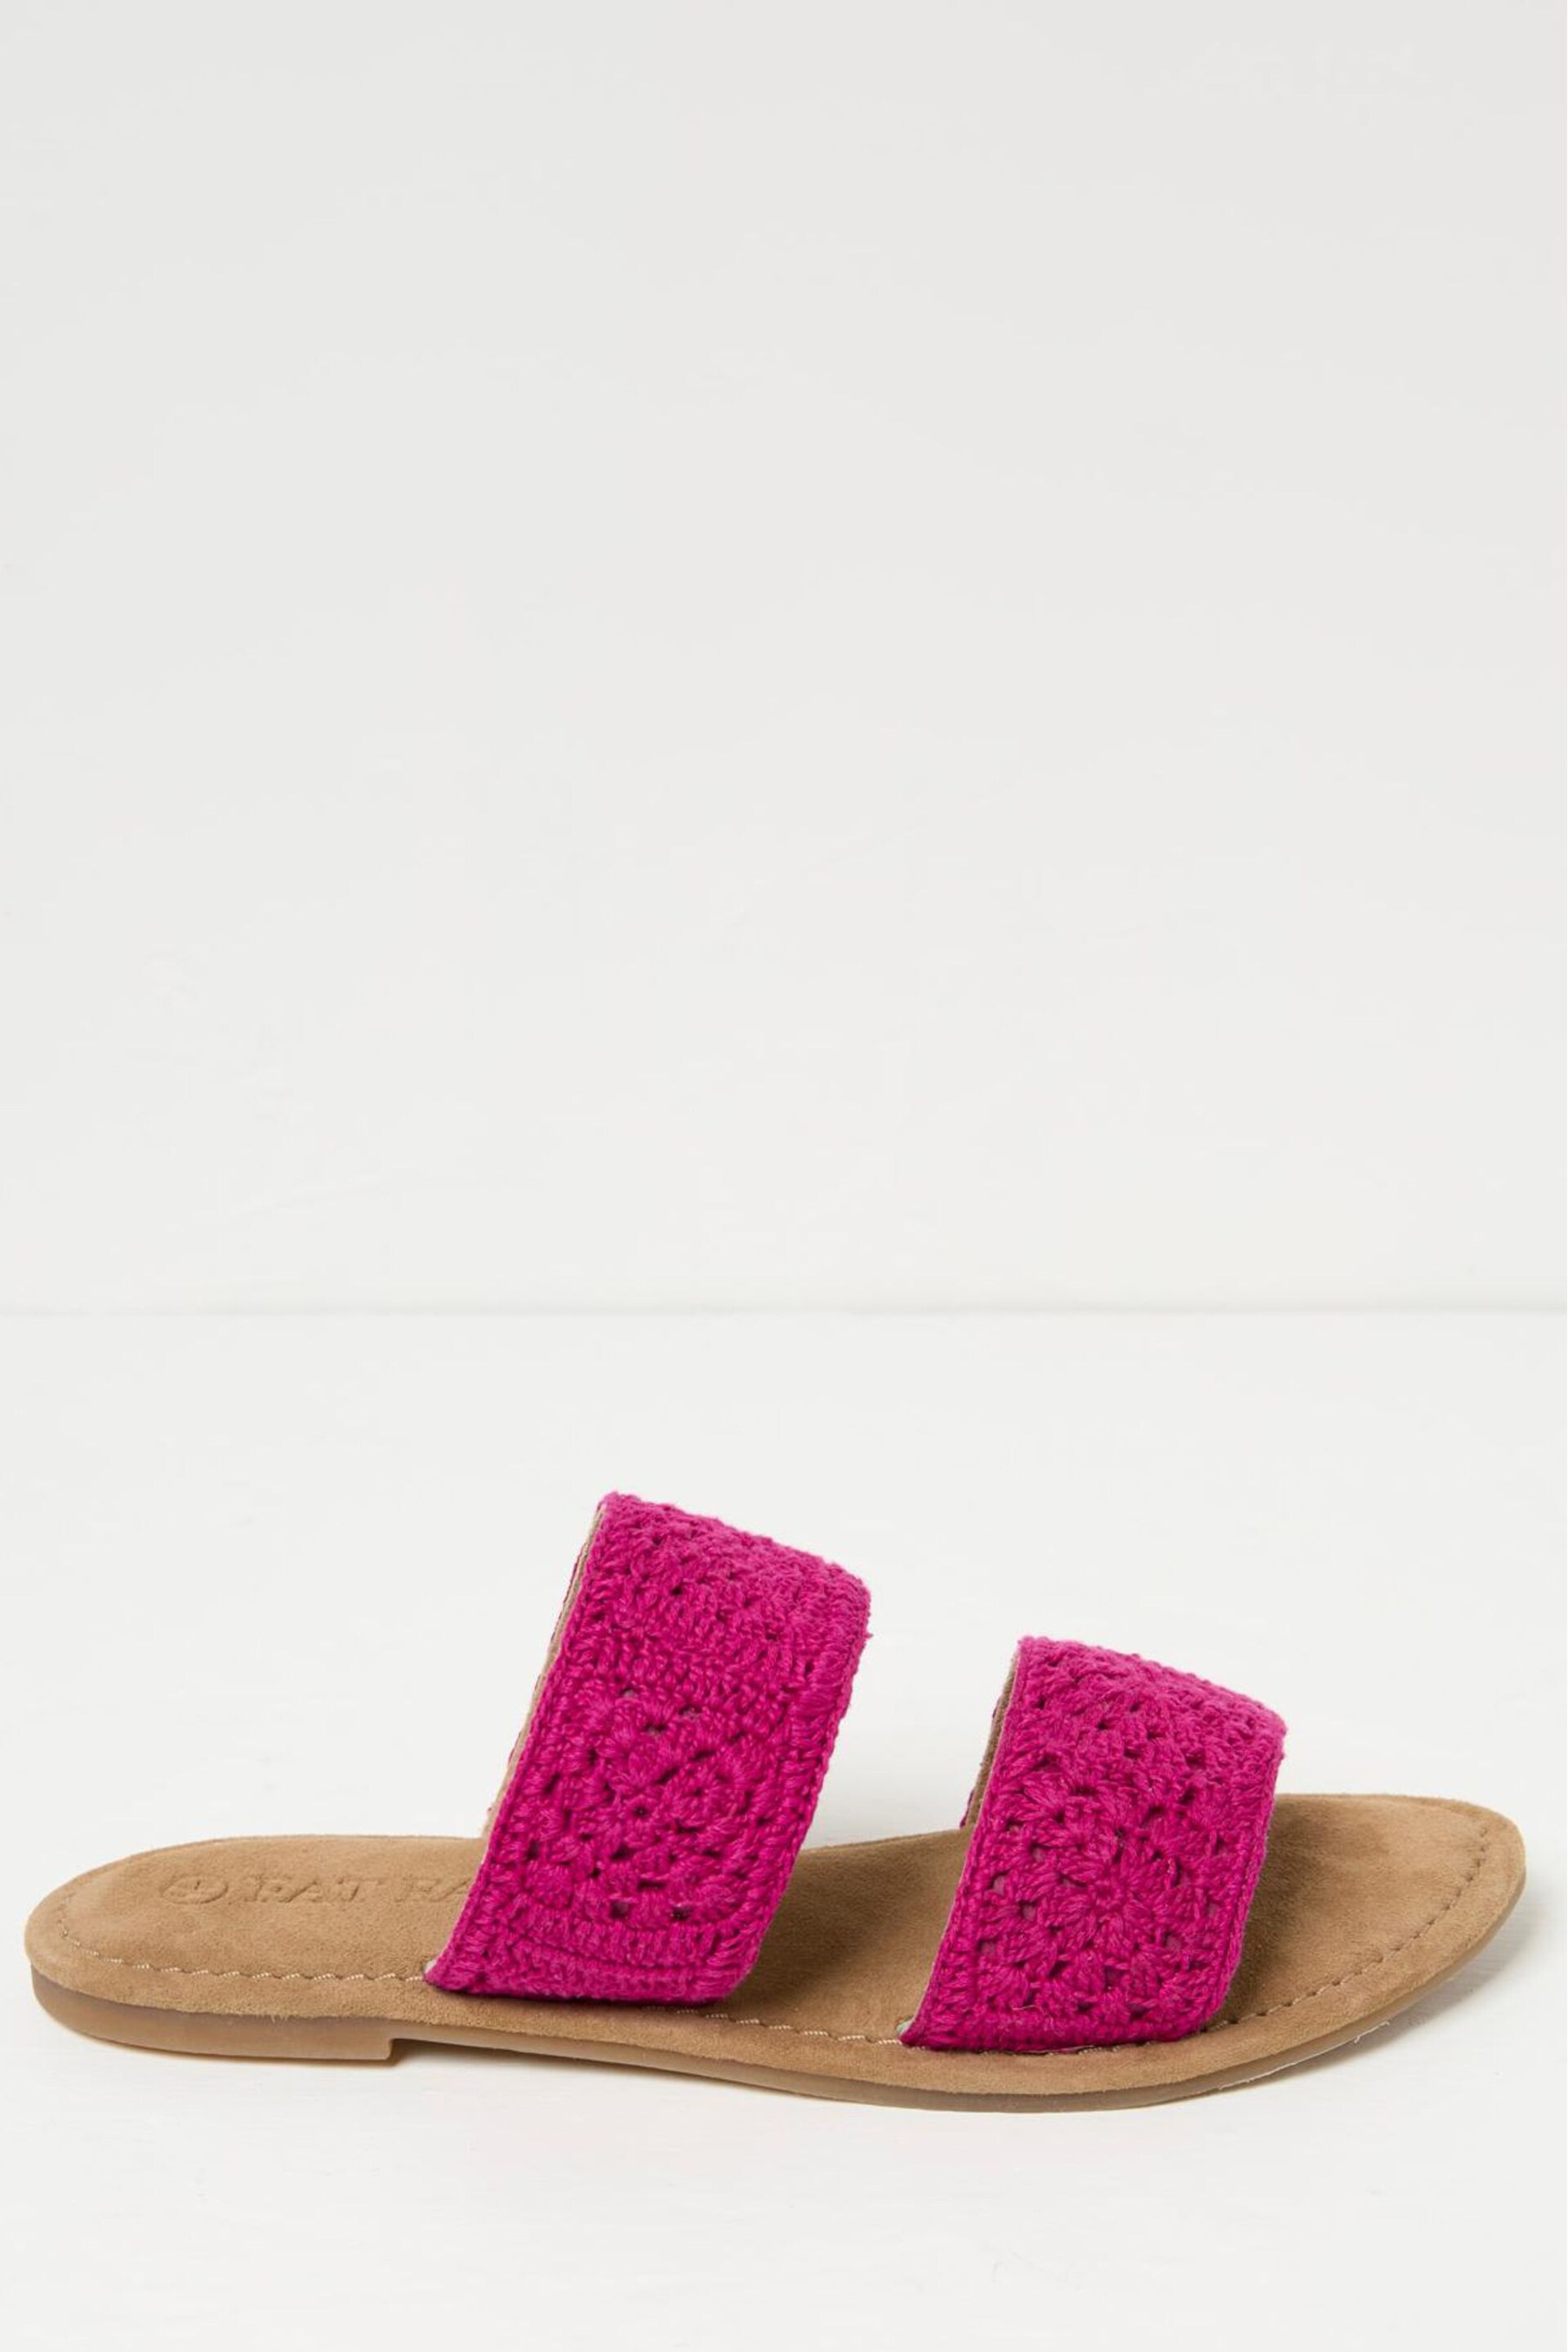 FatFace Pink Crochet Sliders - Image 1 of 3